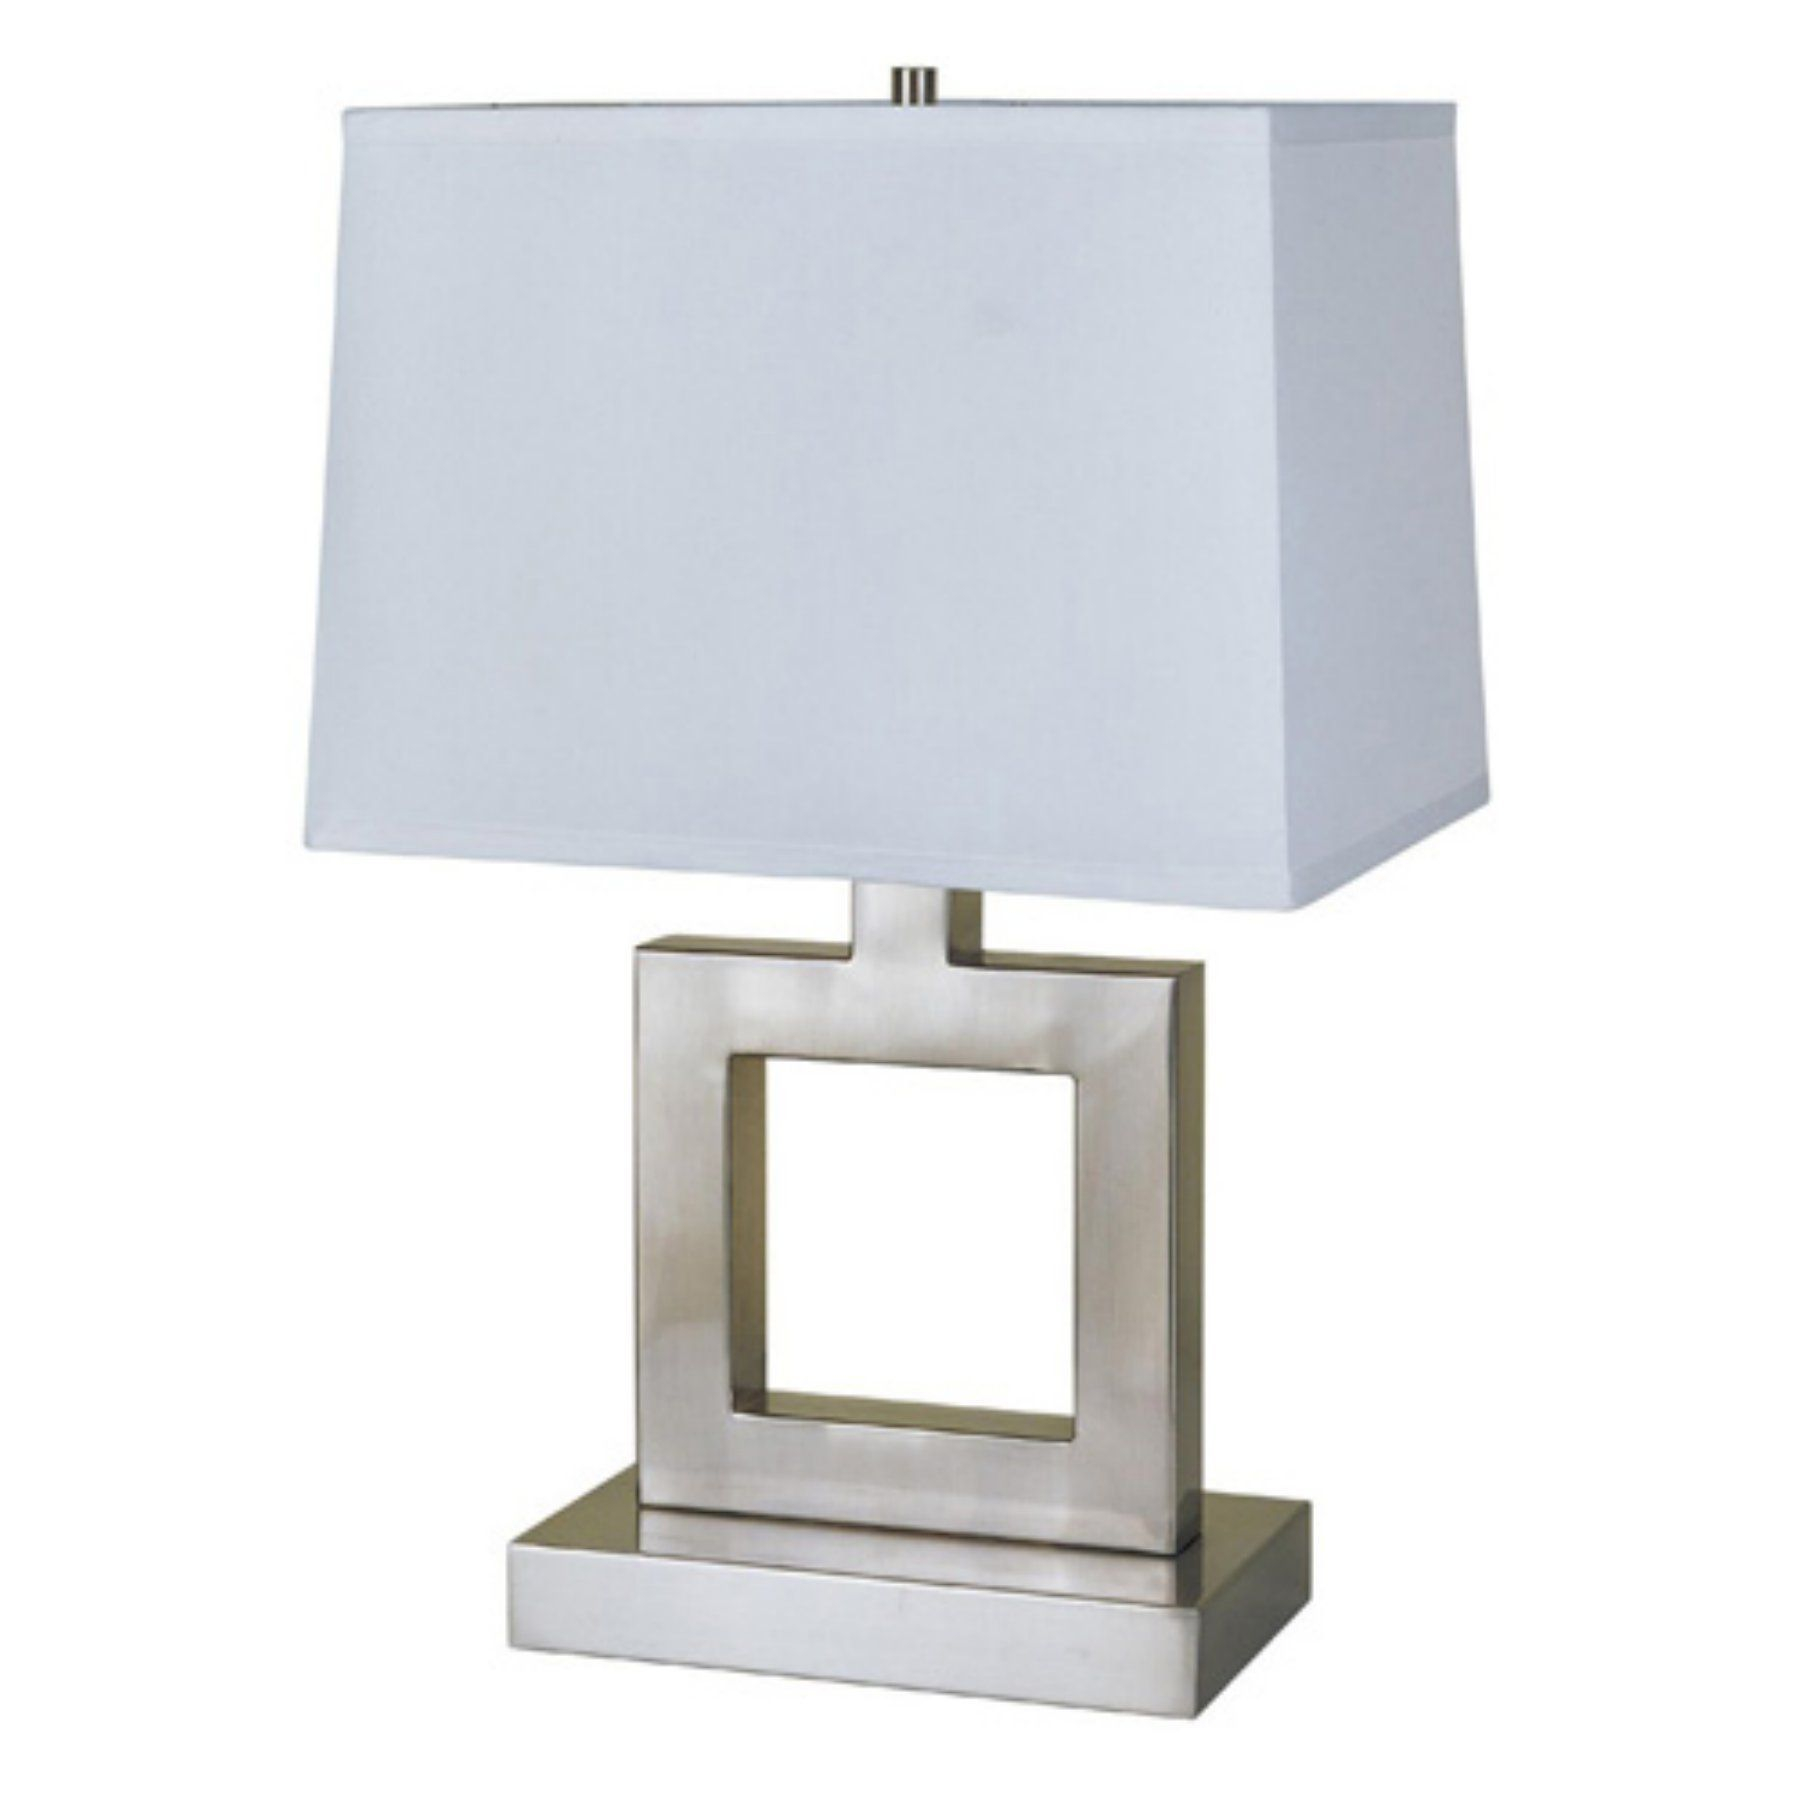 Ore International 8137s 22 In Square Table Lamp Satin with regard to sizing 1800 X 1800